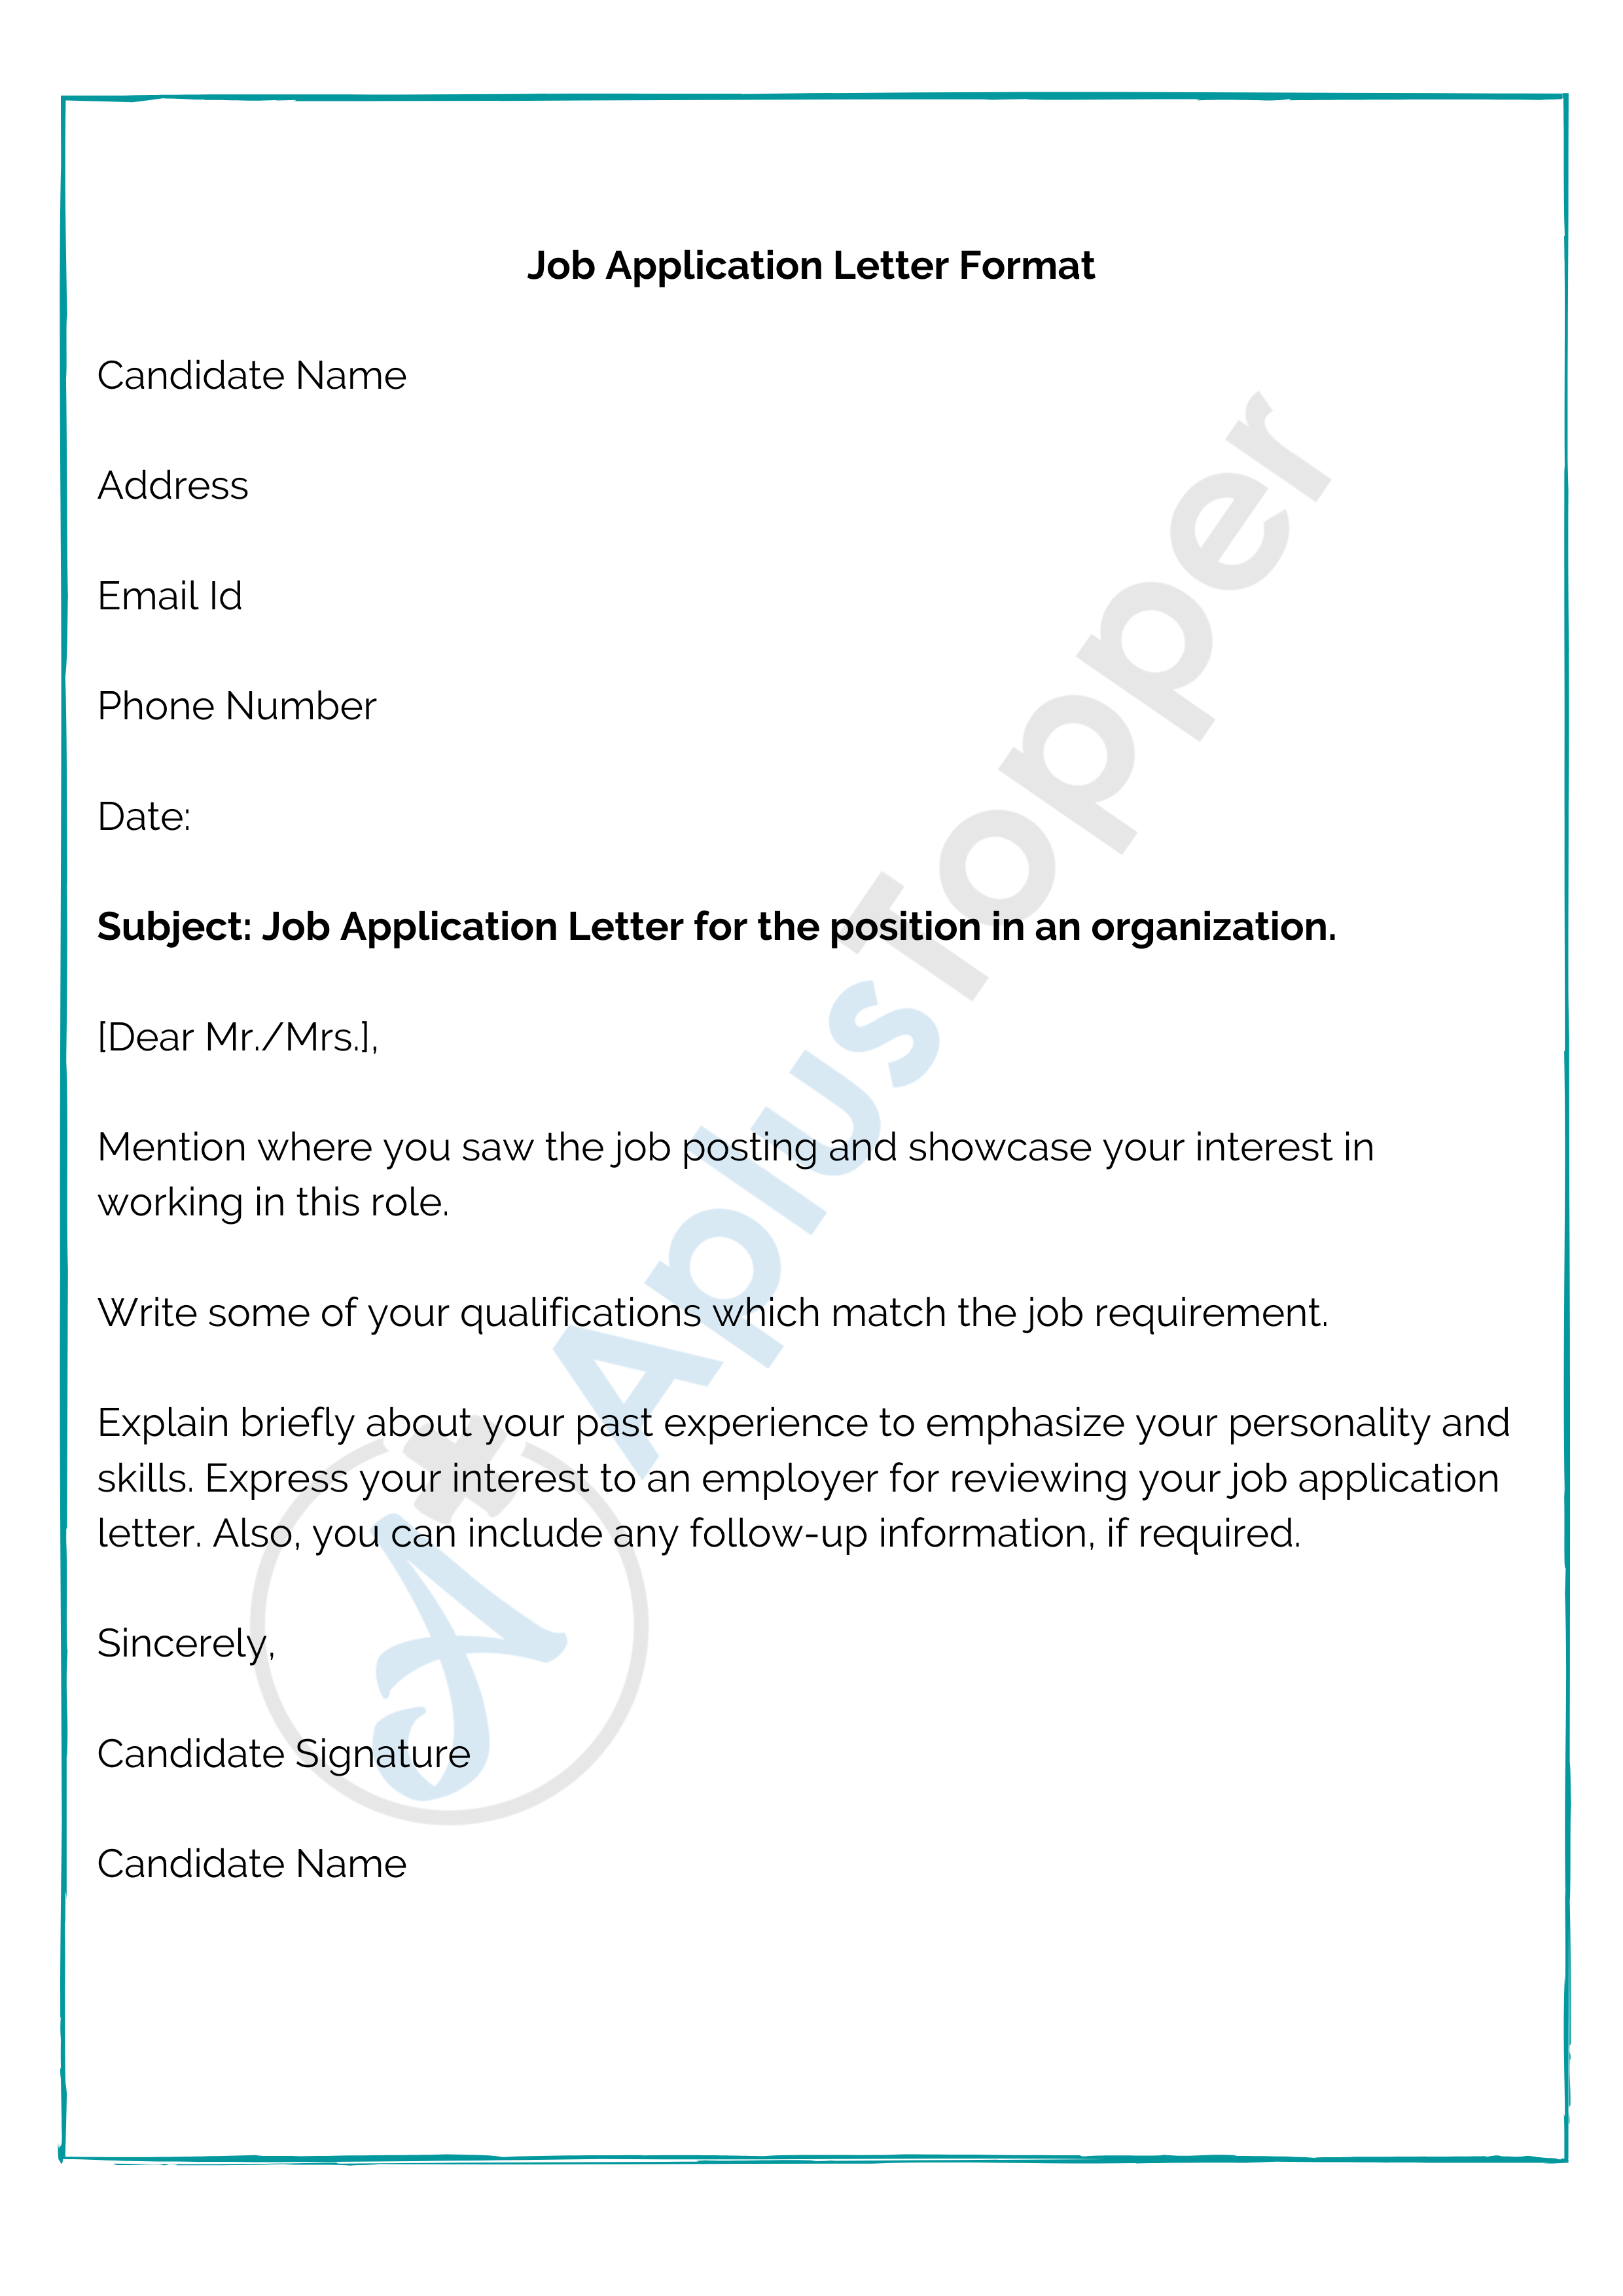 Job Application Letter Format Samples How To Write A Job Application Letter A Plus Topper